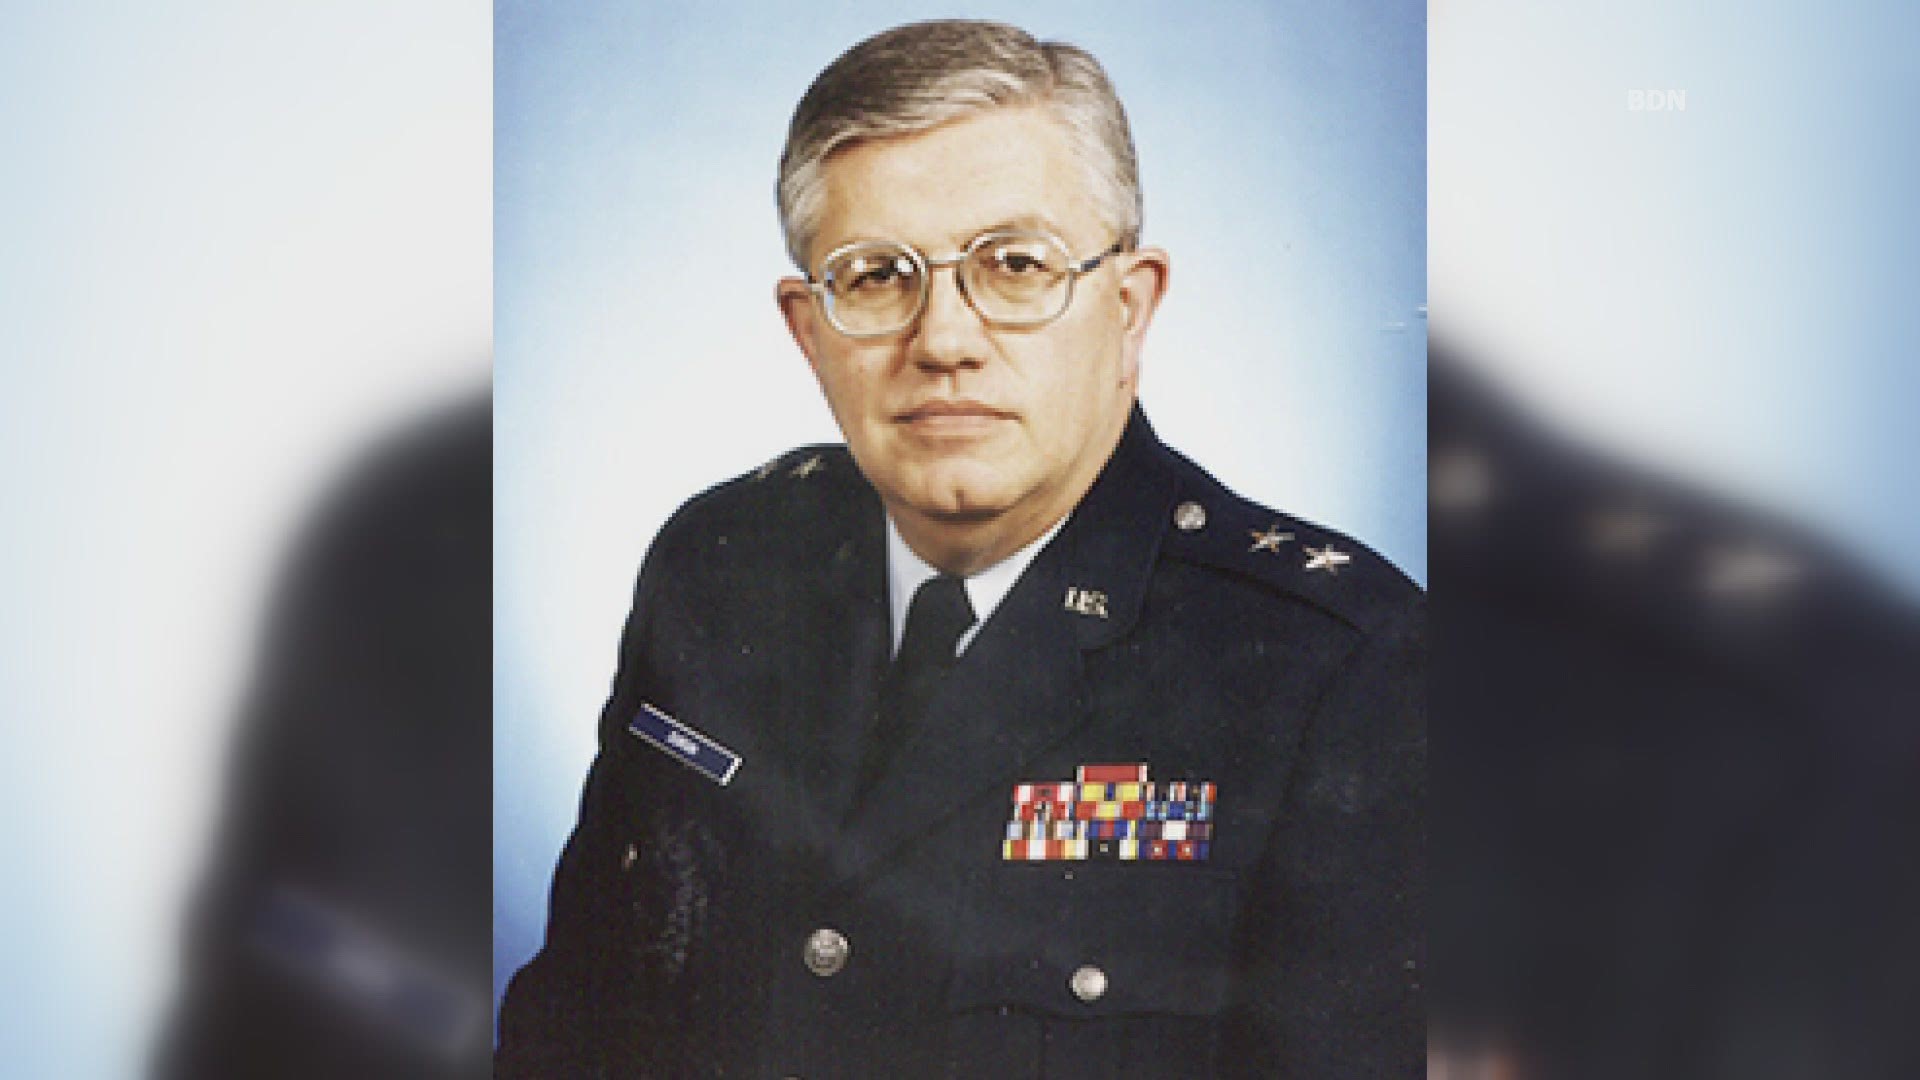 A Bangor Daily News obituary says Major General Dirgin died in his home of Friday, September 11, 2020.